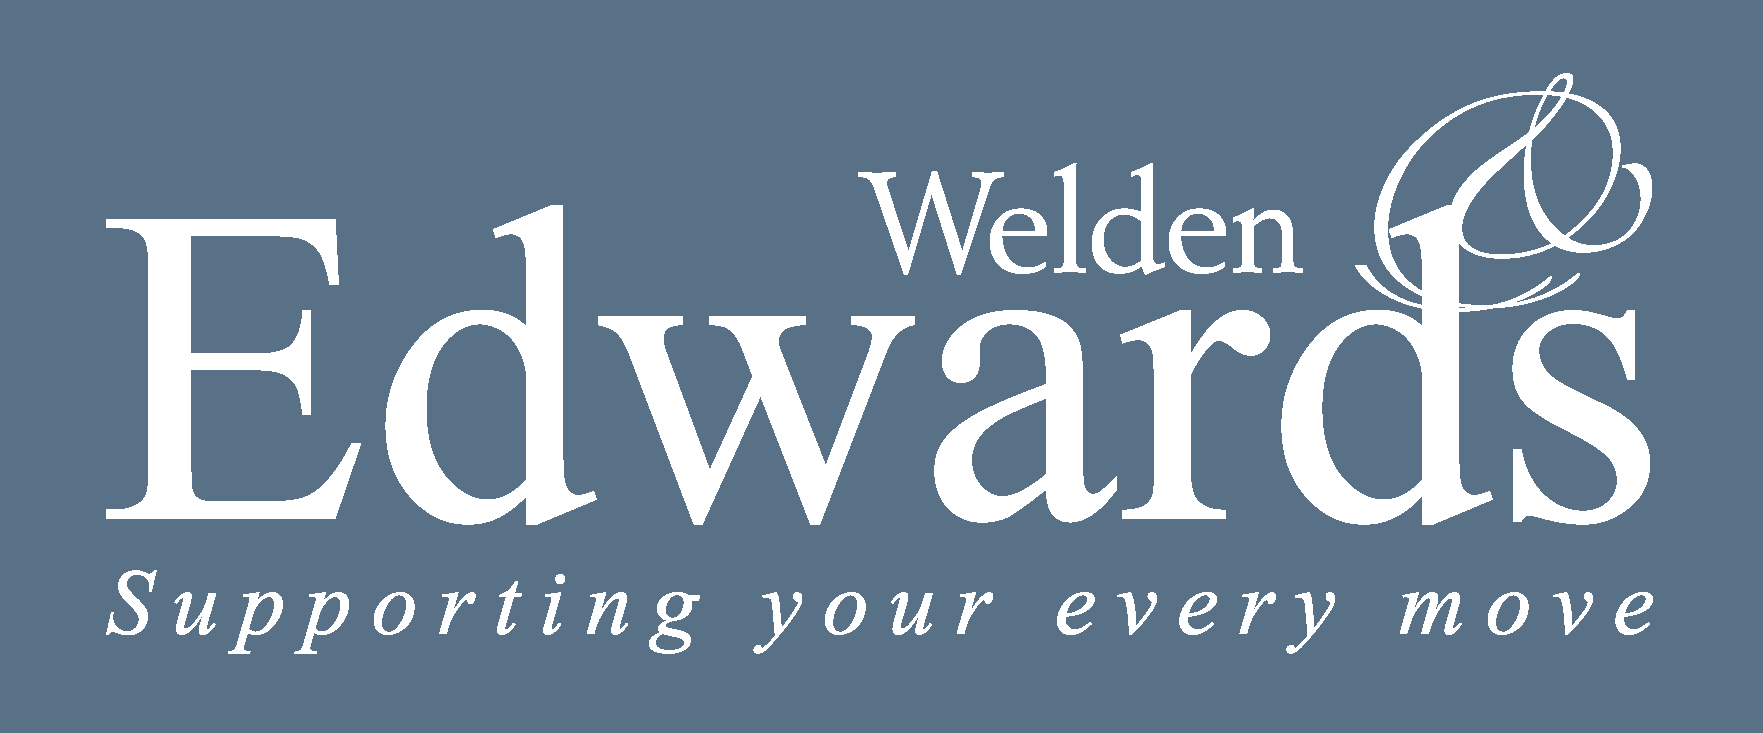 Edwards Logo - Welden & Edwards Supporting your every move...